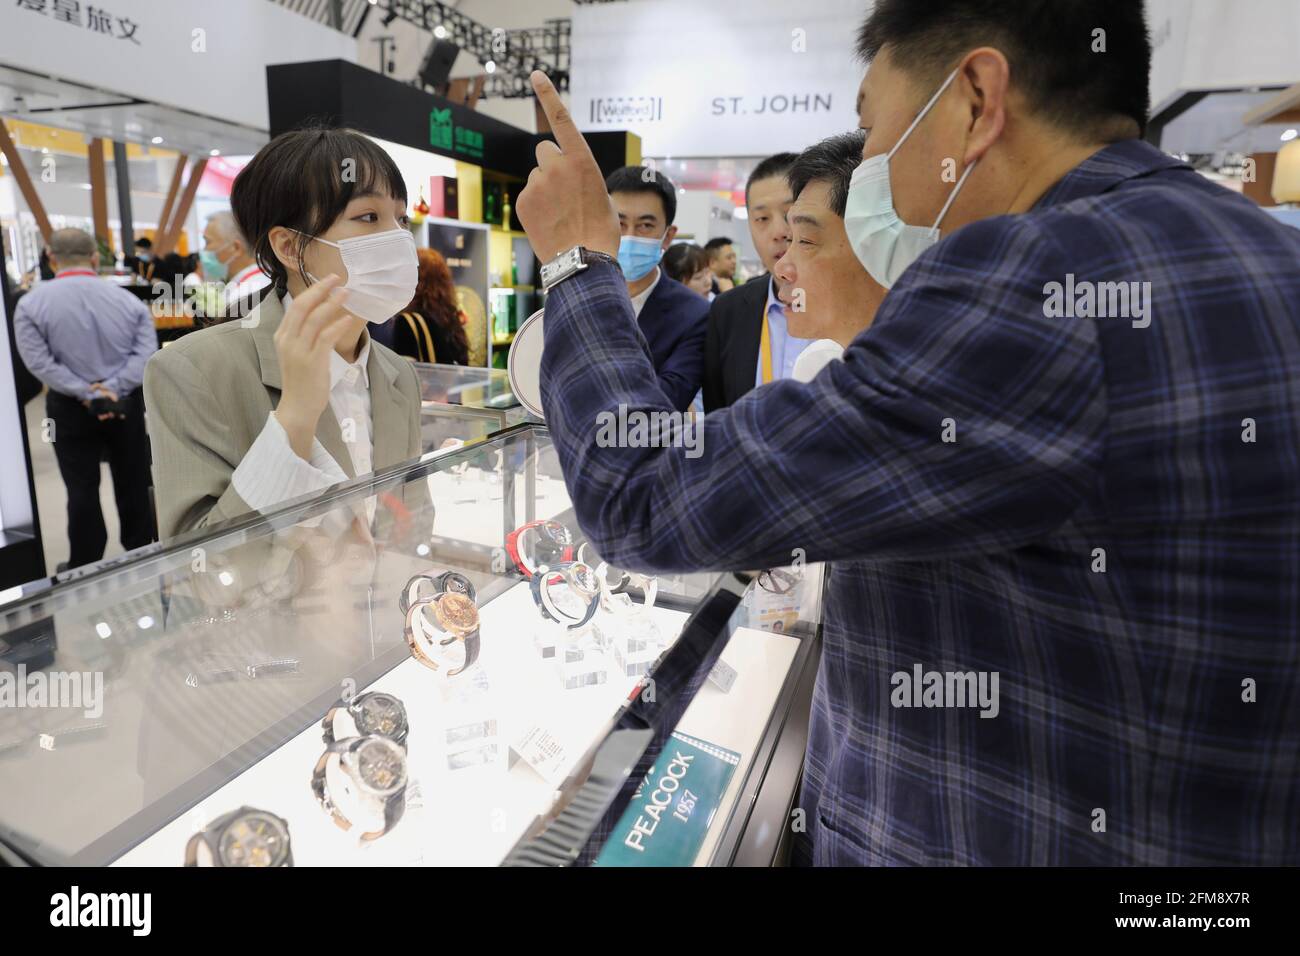 HAIKOU, May 7, 2021  Visitors ask information about watches of domestic brands in the Fashion Life Exhibition Hall of the first China International Consumer Products Expo in Haikou, capital of south China's Hainan Province, May 7, 2021. Slated for May 7-10, the first China International Consumer Products Expo has attracted 648 overseas companies and 1,365 brands from 69 countries and regions, as well as 857 enterprises and 1,263 brands from China. Covering 80,000 square meters, the expo will be the largest consumer goods expo in the Asia-Pacific region, the organizers Credit: Xinhua/Alamy Liv Stock Photo